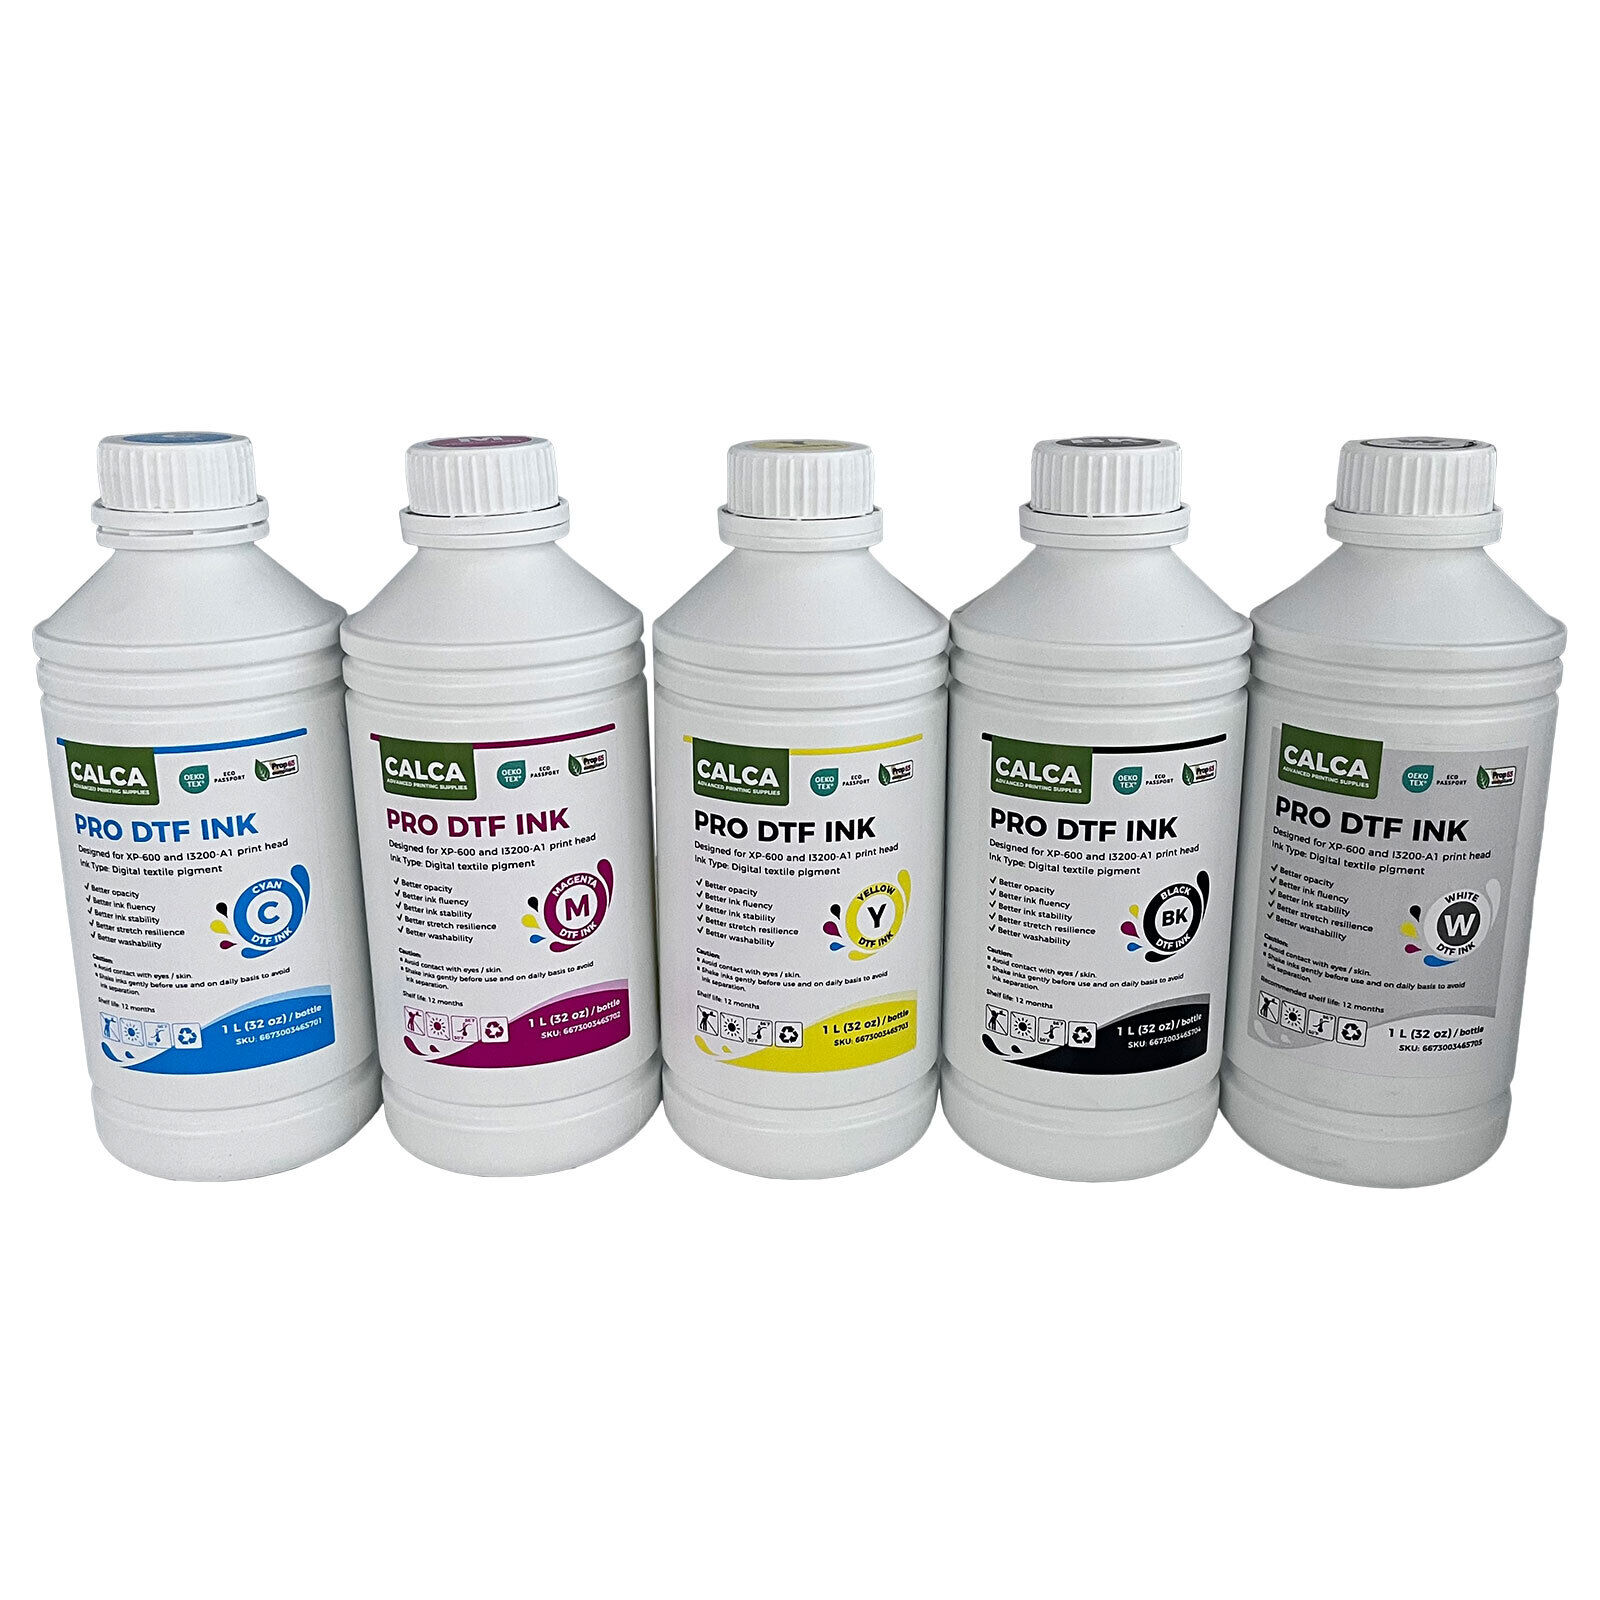 CALCA PRO Direct to Transfer Ink for Epson Printhead Water-based DTF Ink 32oz 1L